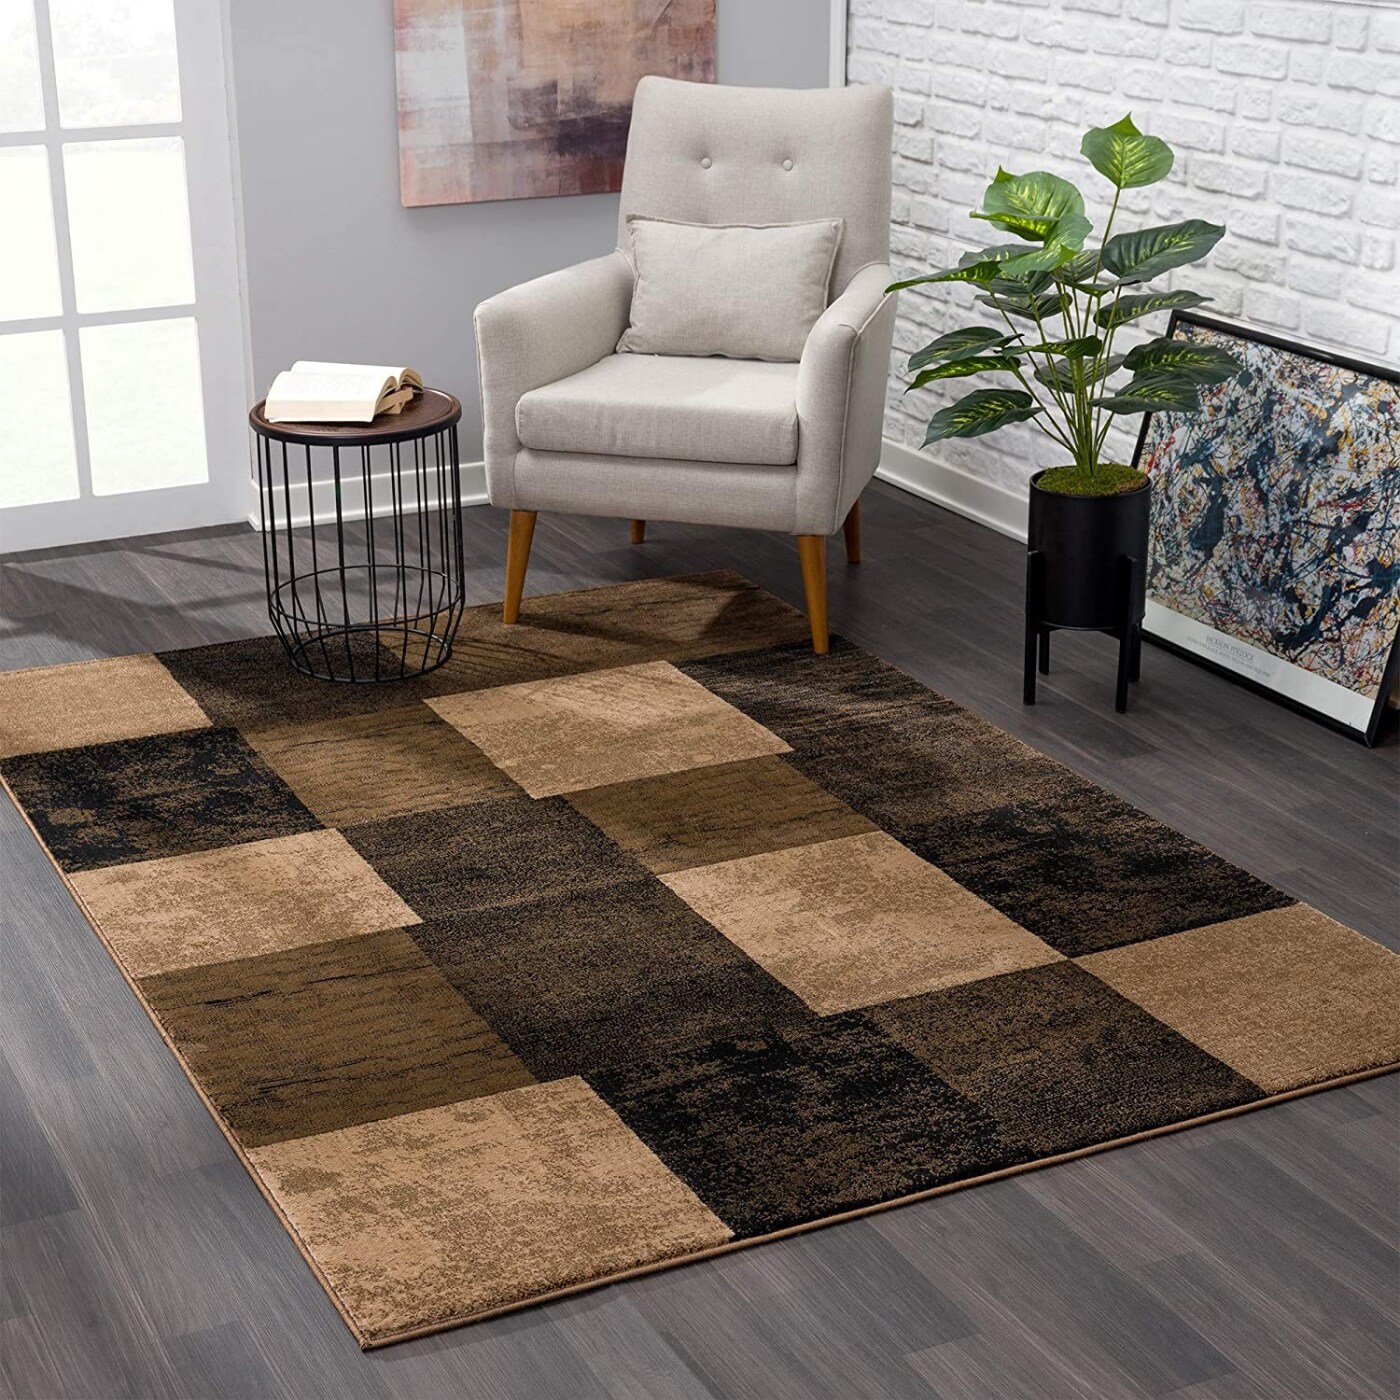 HomeRoots 5' x 8' Modern Faux Cowhide Fabric Area Rug in Brown